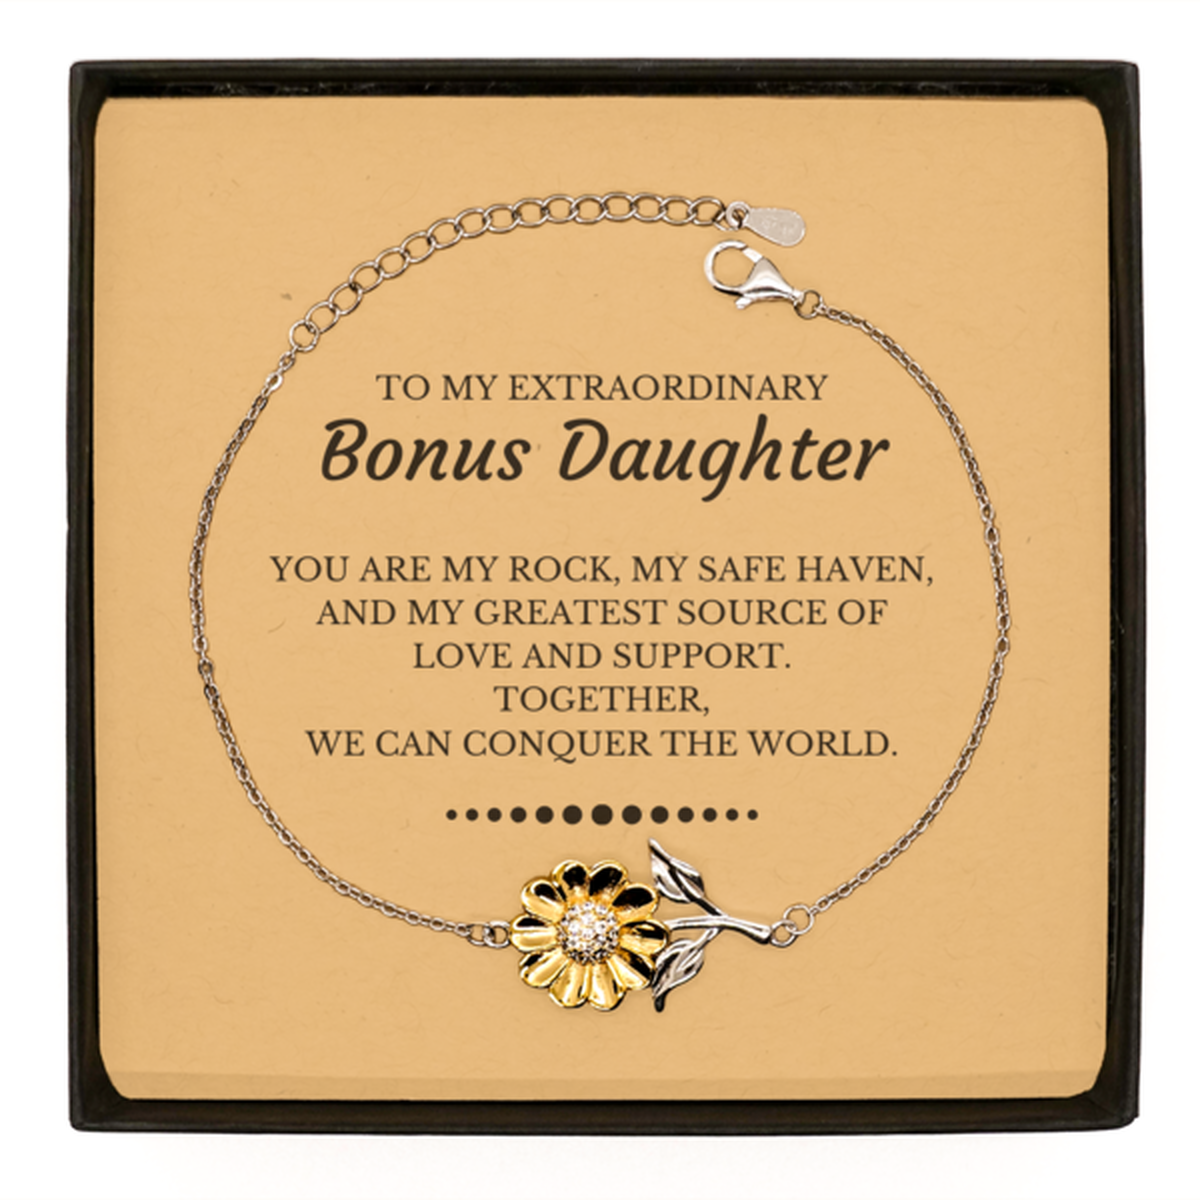 To My Extraordinary Bonus Daughter Gifts, Together, we can conquer the world, Birthday Sunflower Bracelet For Bonus Daughter, Christmas Gifts For Bonus Daughter